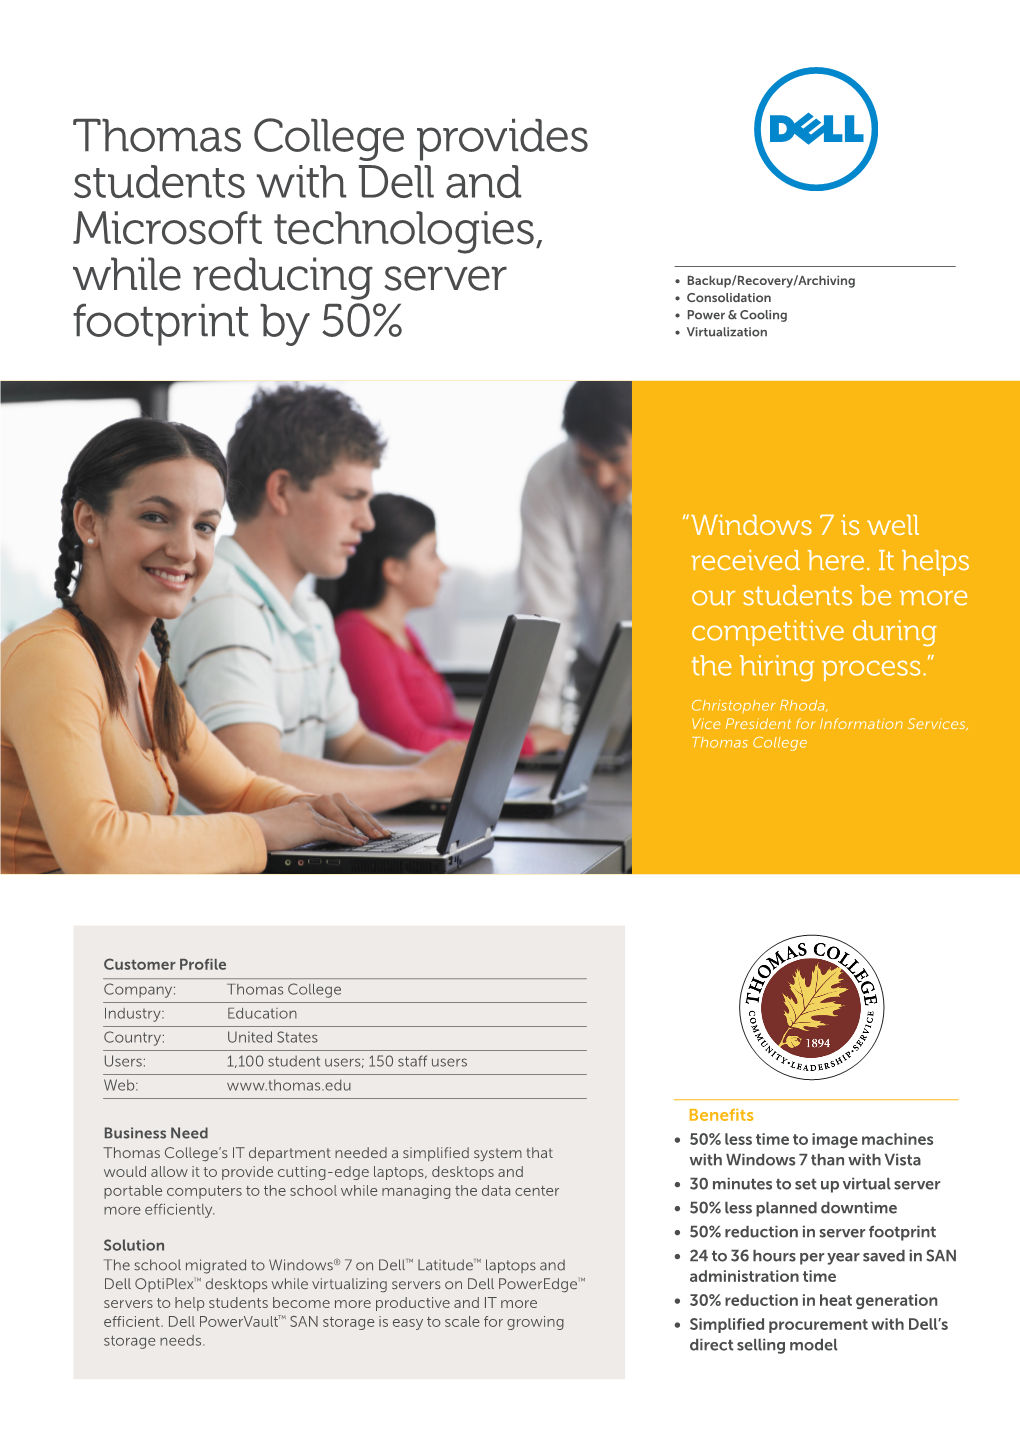 Thomas College Provides Students with Dell and Microsoft